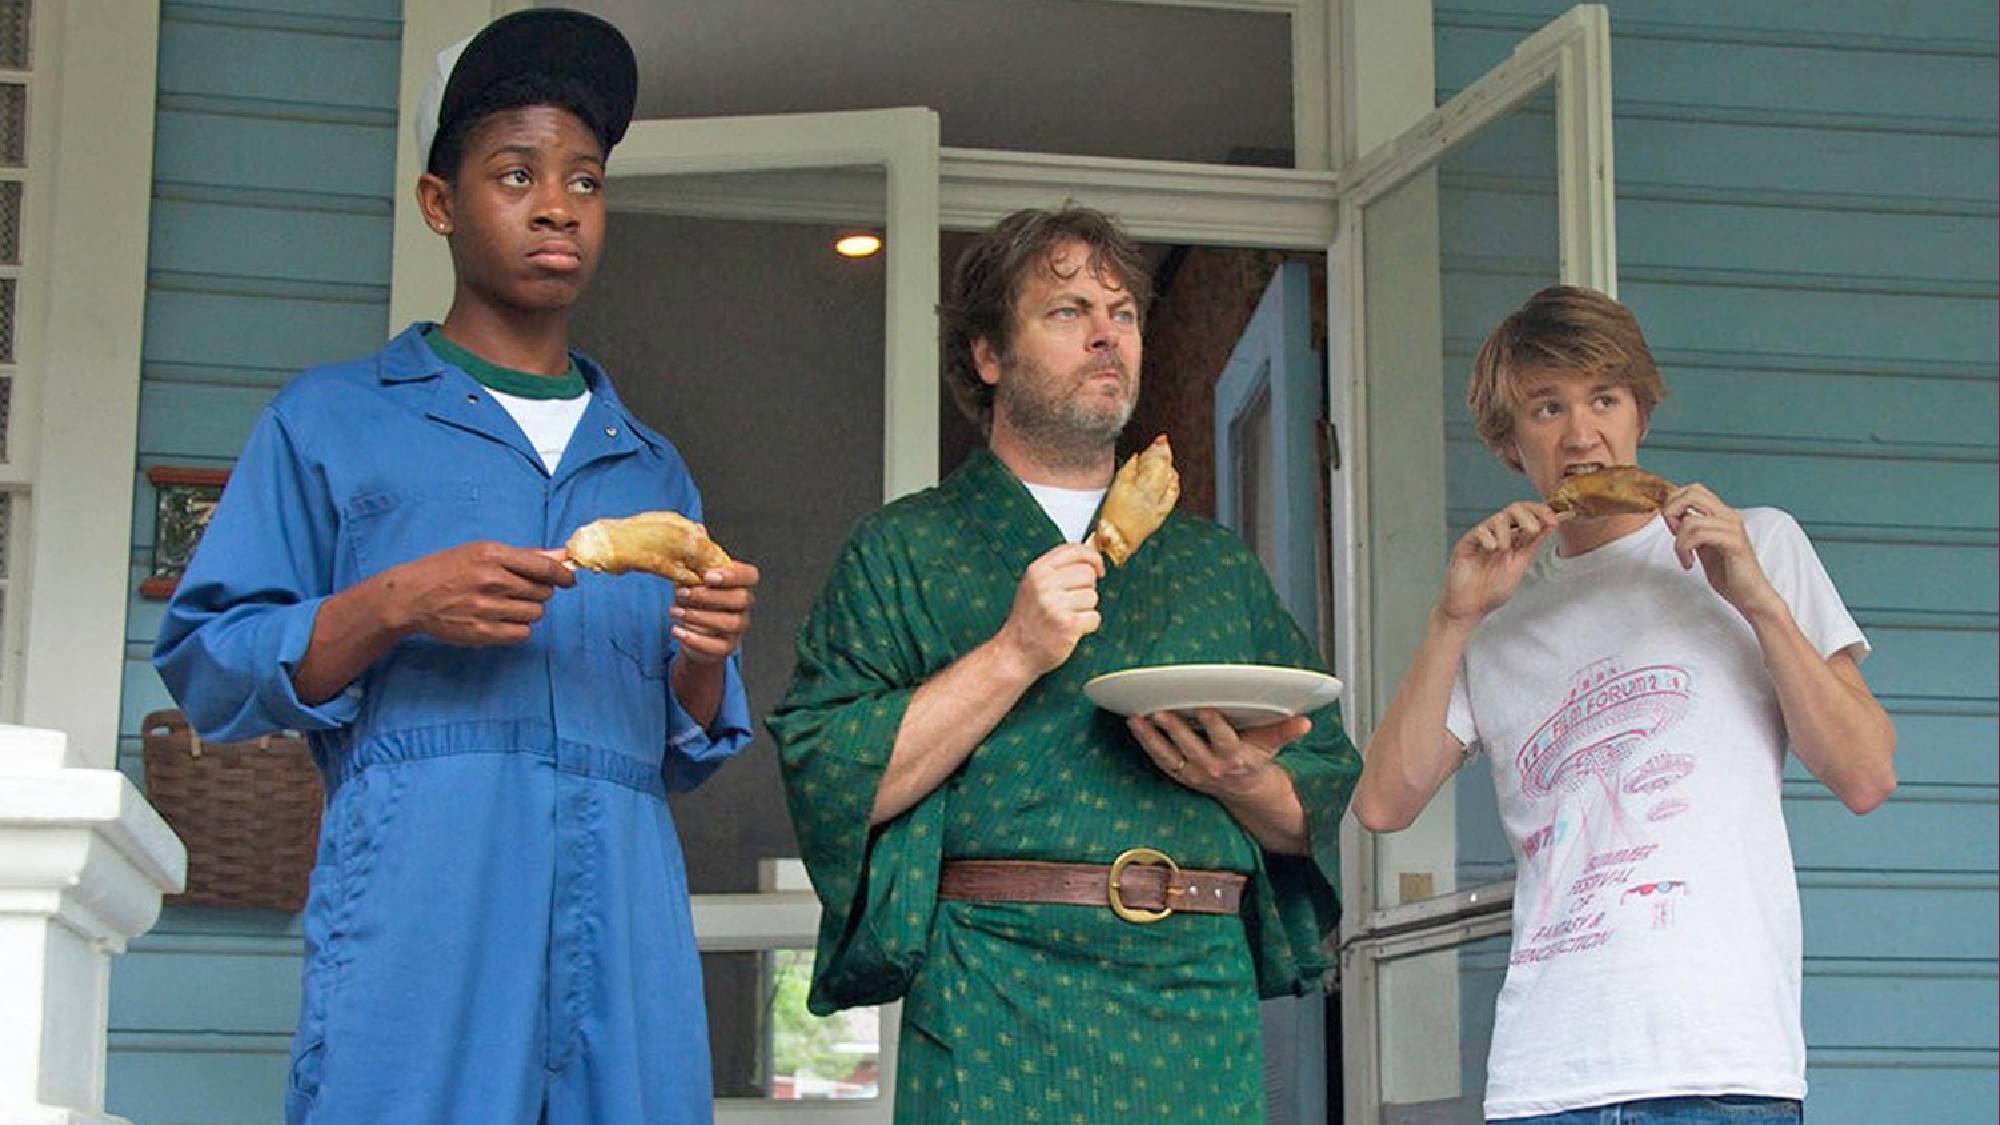 (R-L) RJ Cyler as Earl Jackson, Nick Offerman as Victor Gaines and Thomas Mann as Greg Gaines in 